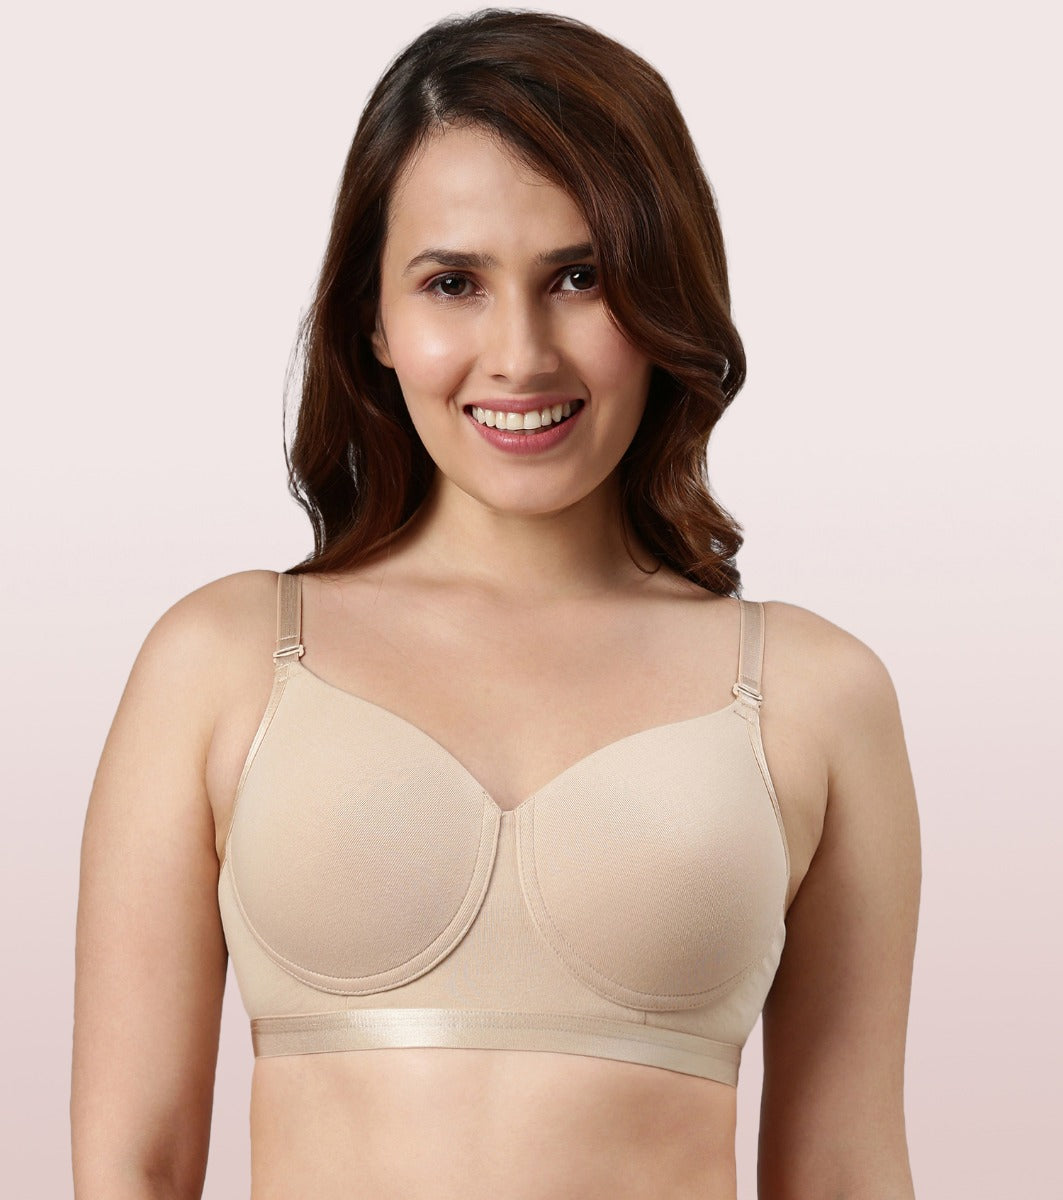 Enamor A019 T-Shirt Cotton Bra - Non-Padded Wirefree - Black 32C in  Ludhiana at best price by Nighty Point - Justdial